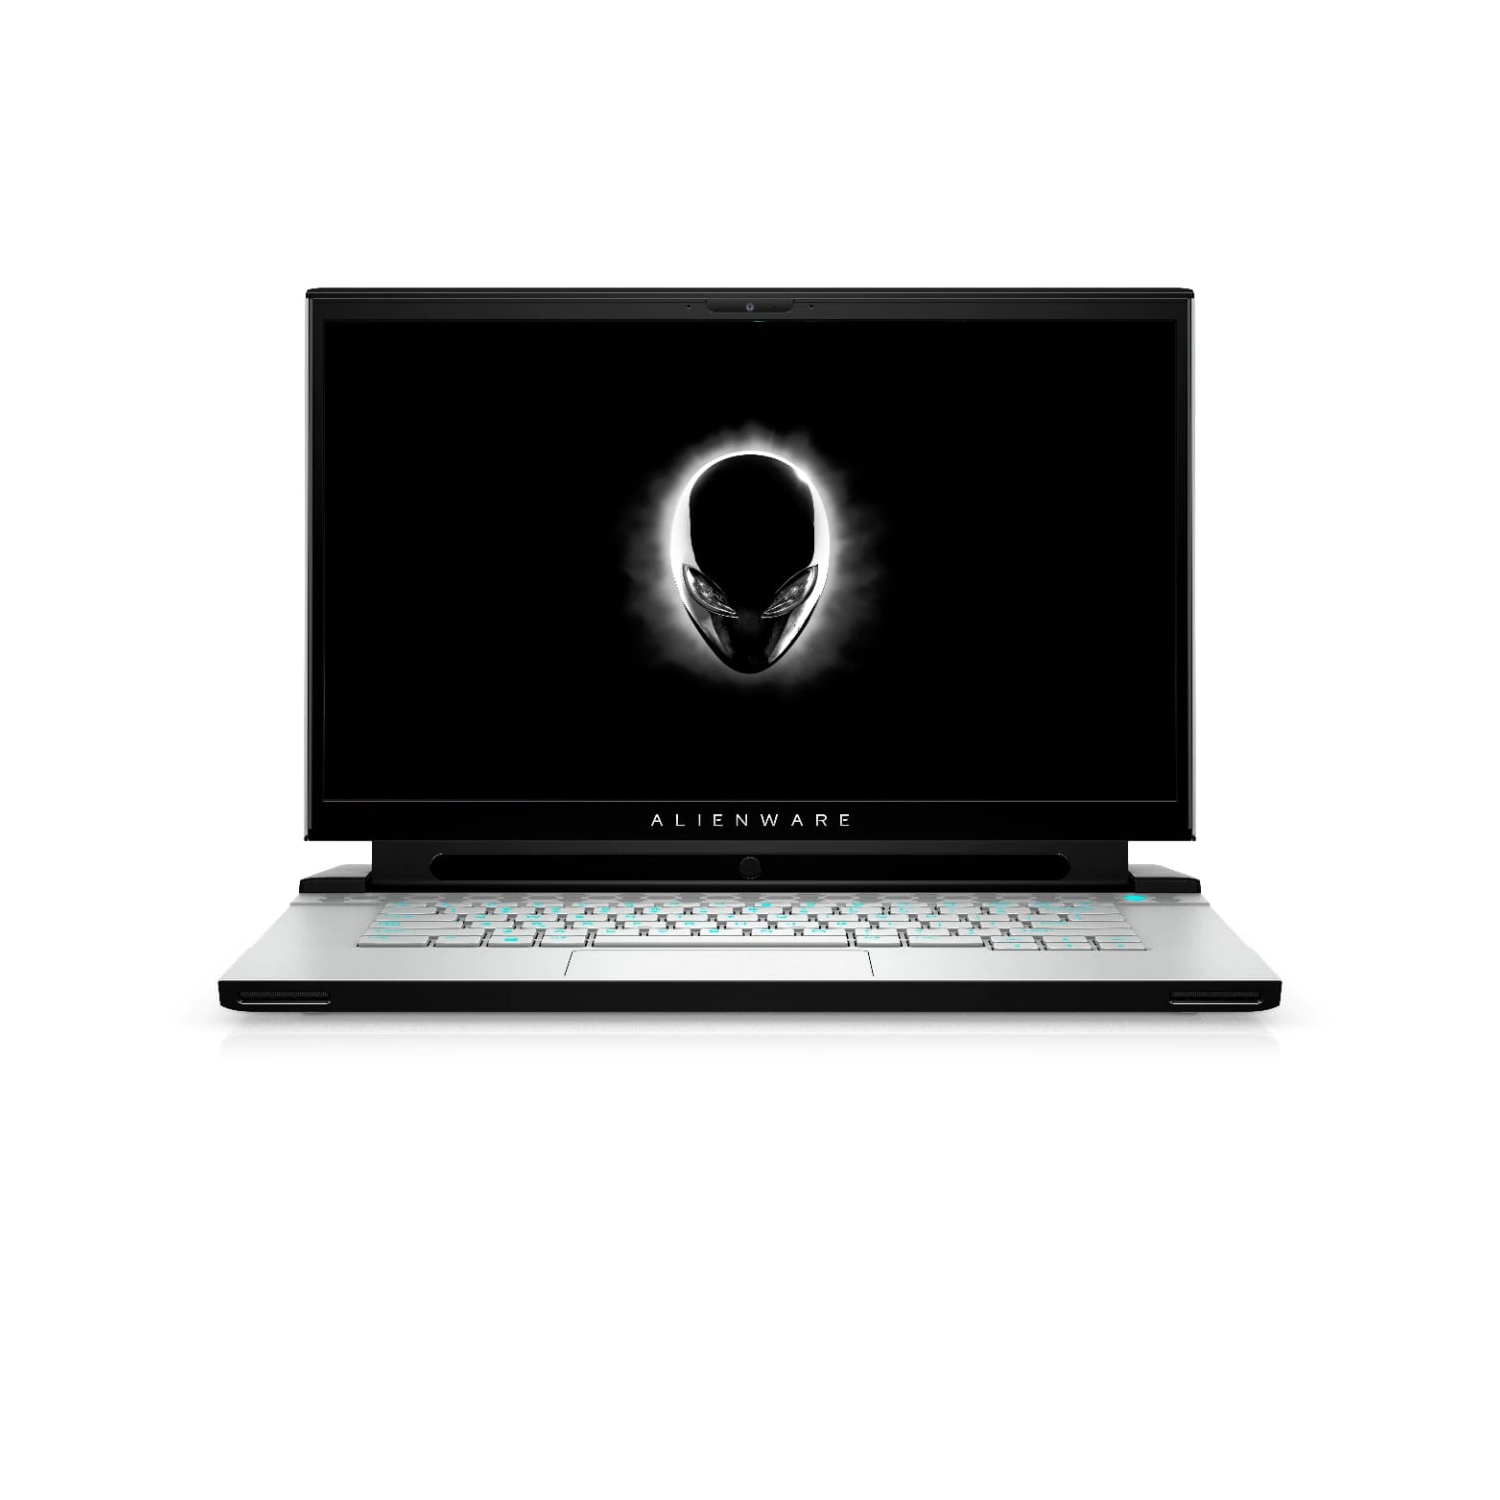 Refurbished (Excellent) - Dell Alienware m15 R3 Gaming Laptop (2020), 15.6" FHD, Core i7, 1TB SSD, 16GB RAM, RTX 2070, 6 Cores @ 5 GHz, 10th Gen CPU Certified Refurbished